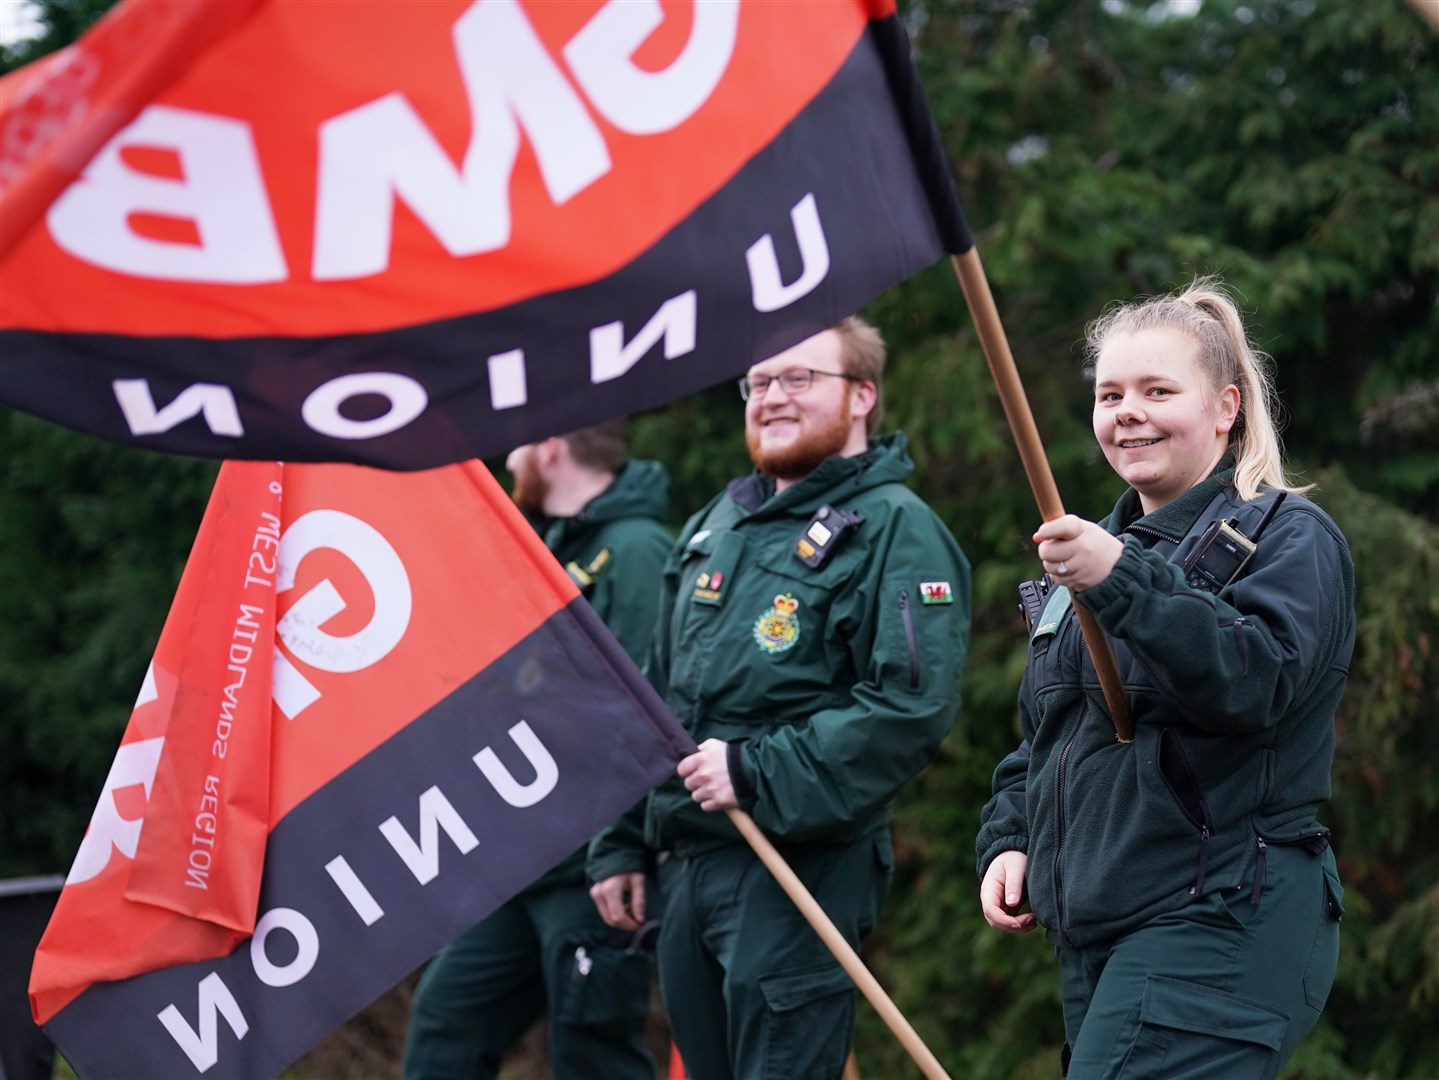 Workers striking in six sectors will have to agree to providing a minimum service level during walkouts, under ministers’ proposals (Jacob King/PA)